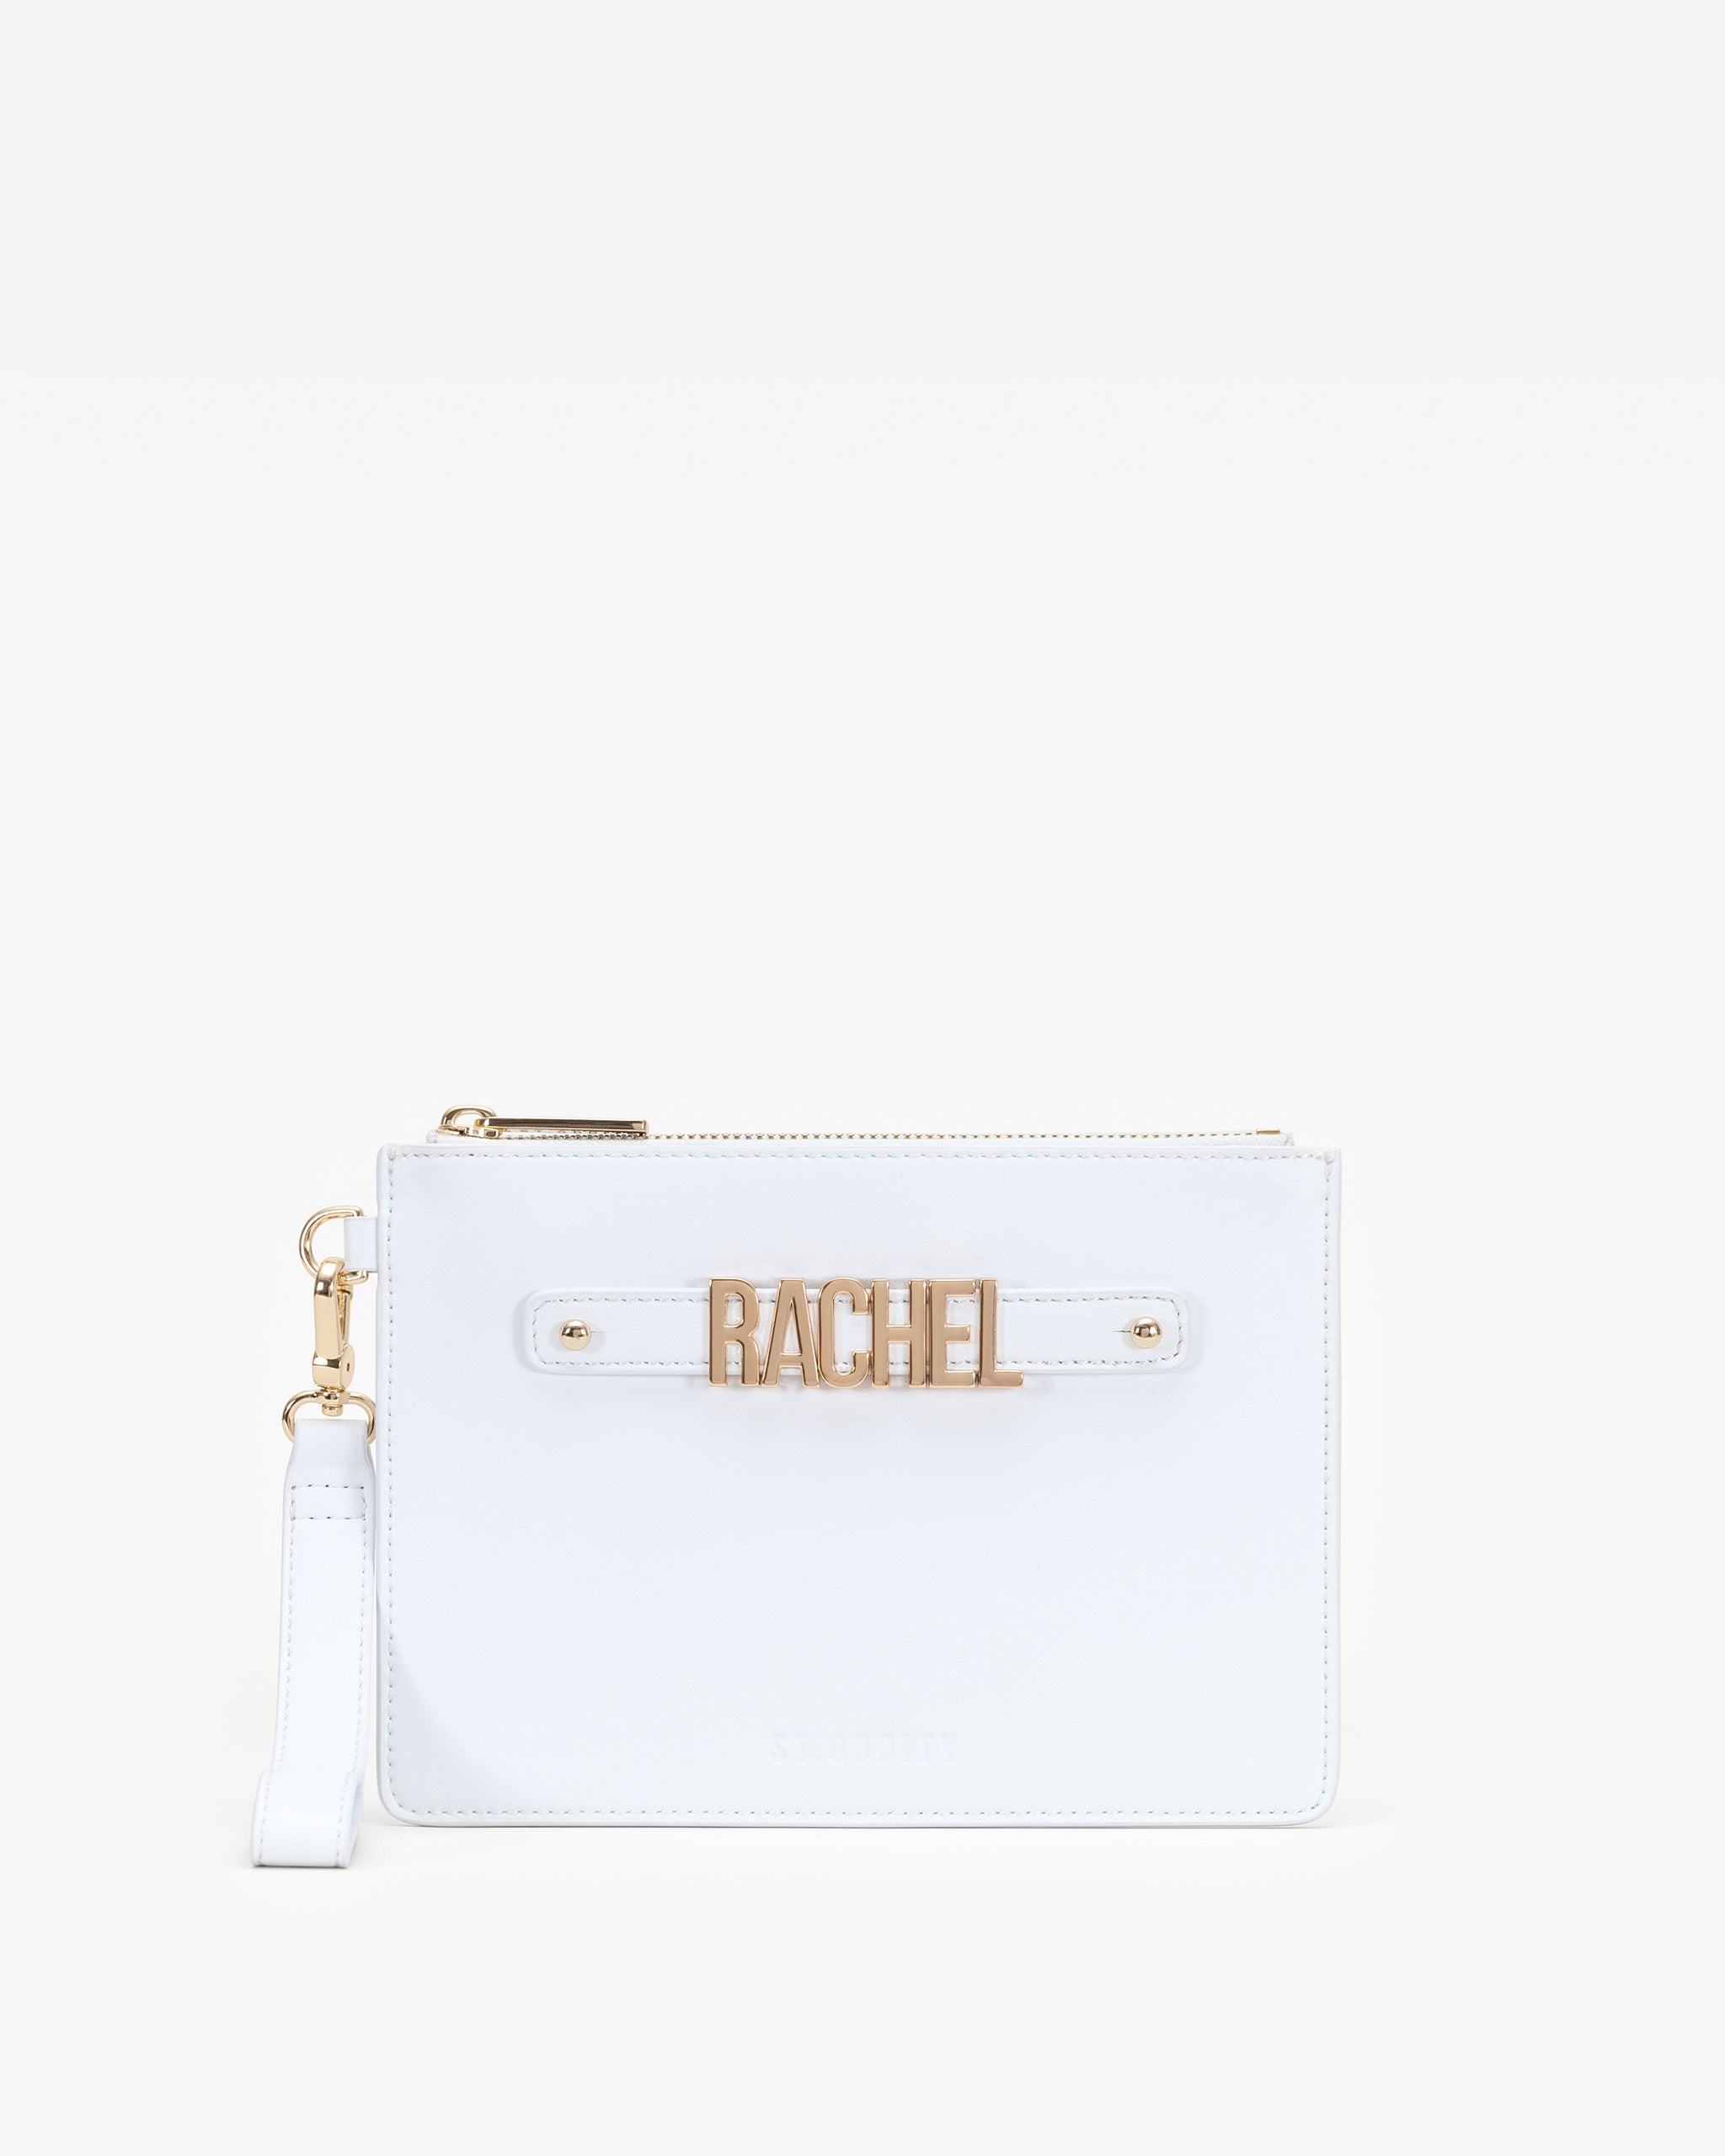 Pre-order (Mid-May): Classic Pouch in White with Personalised Hardware